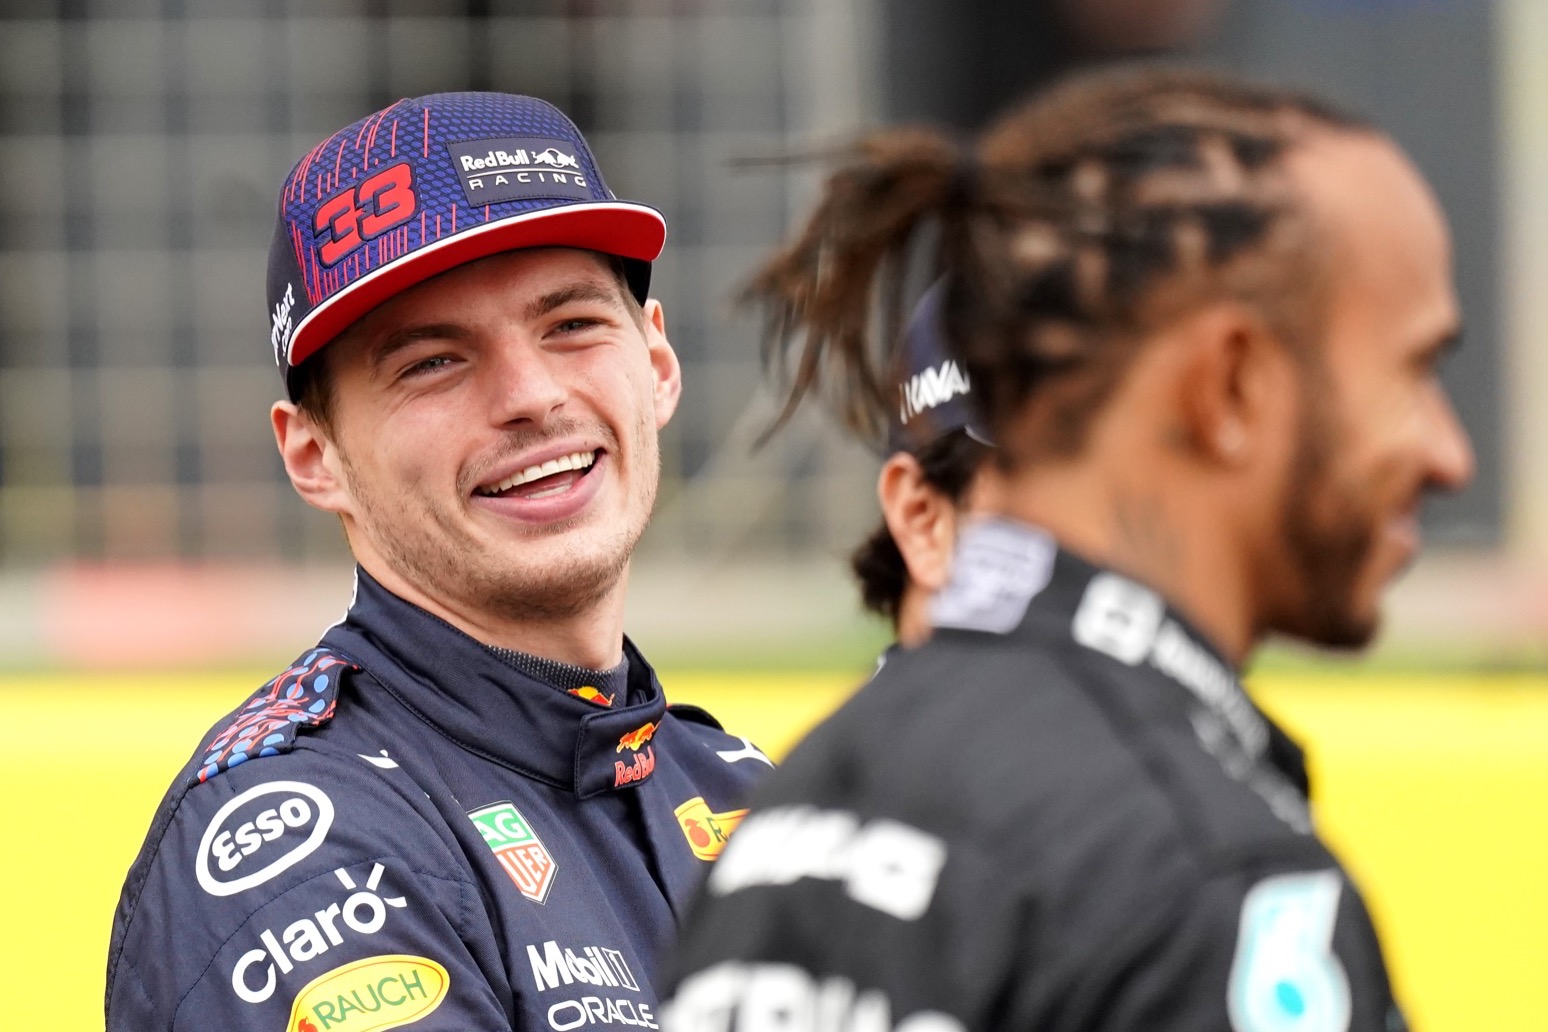 Red Bull’s Max Verstappen has won his first Formula One world championship 